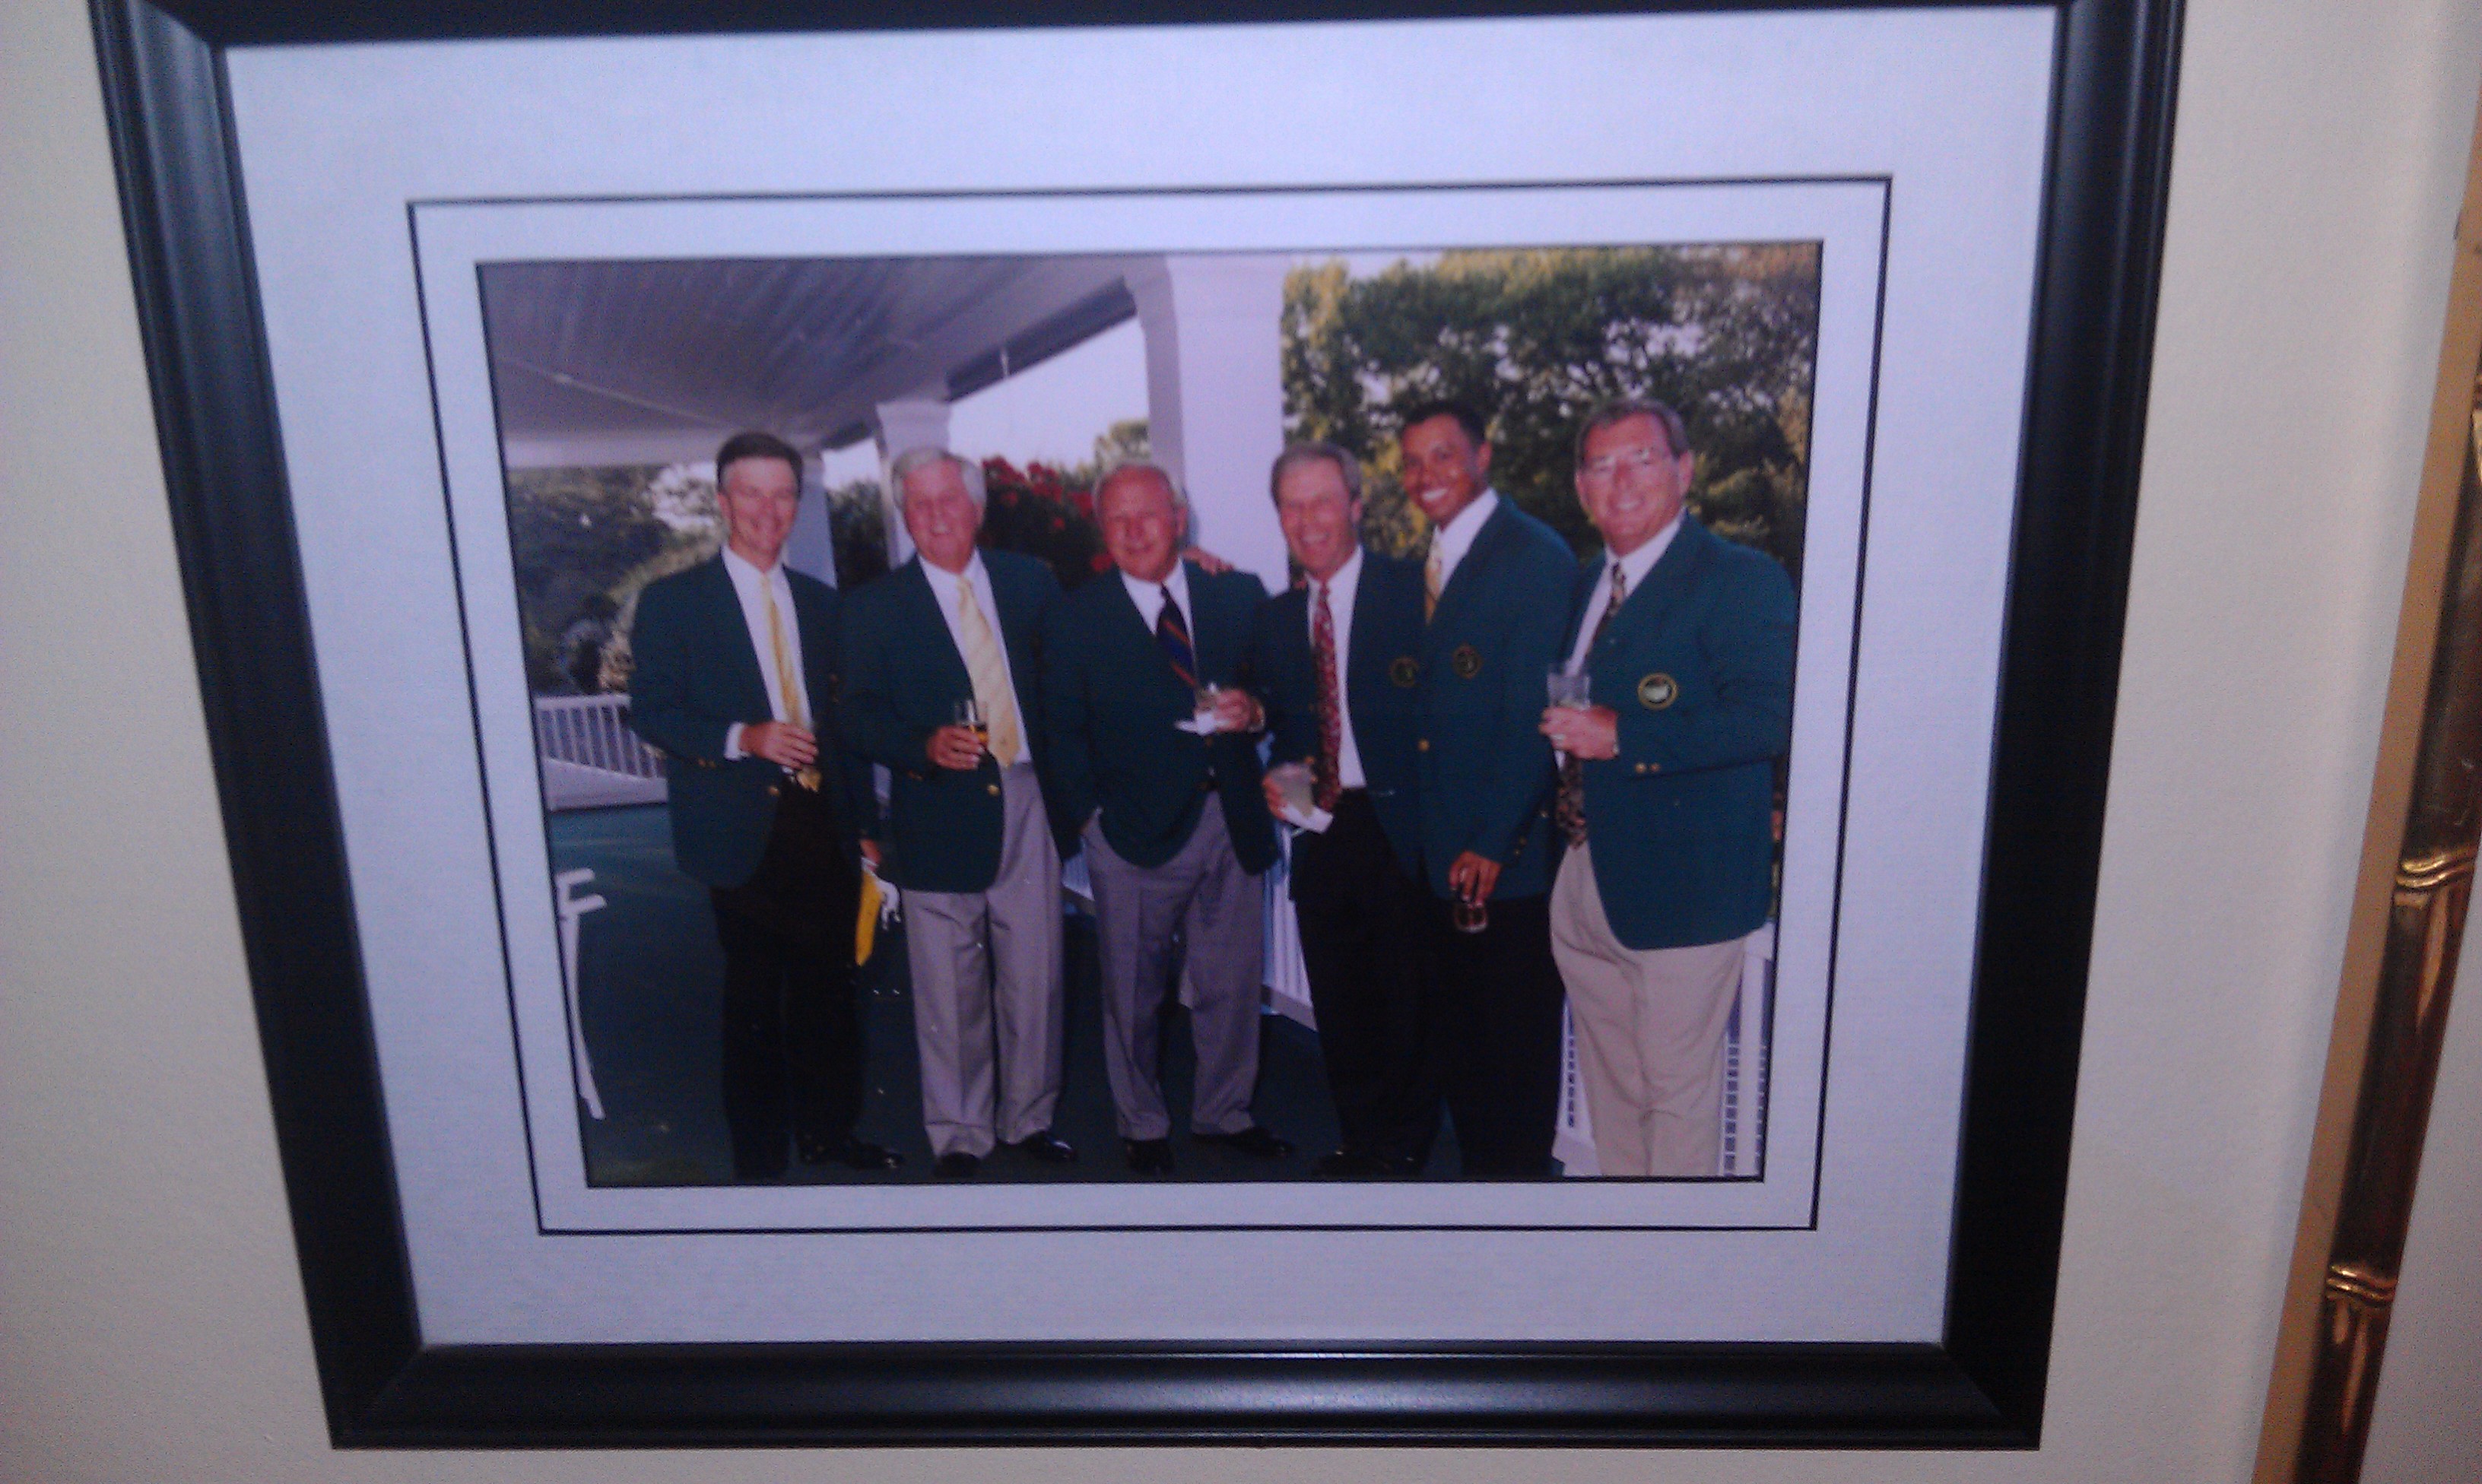 Latrobe Country Club: Masters champions Palmer and Woods, et al.